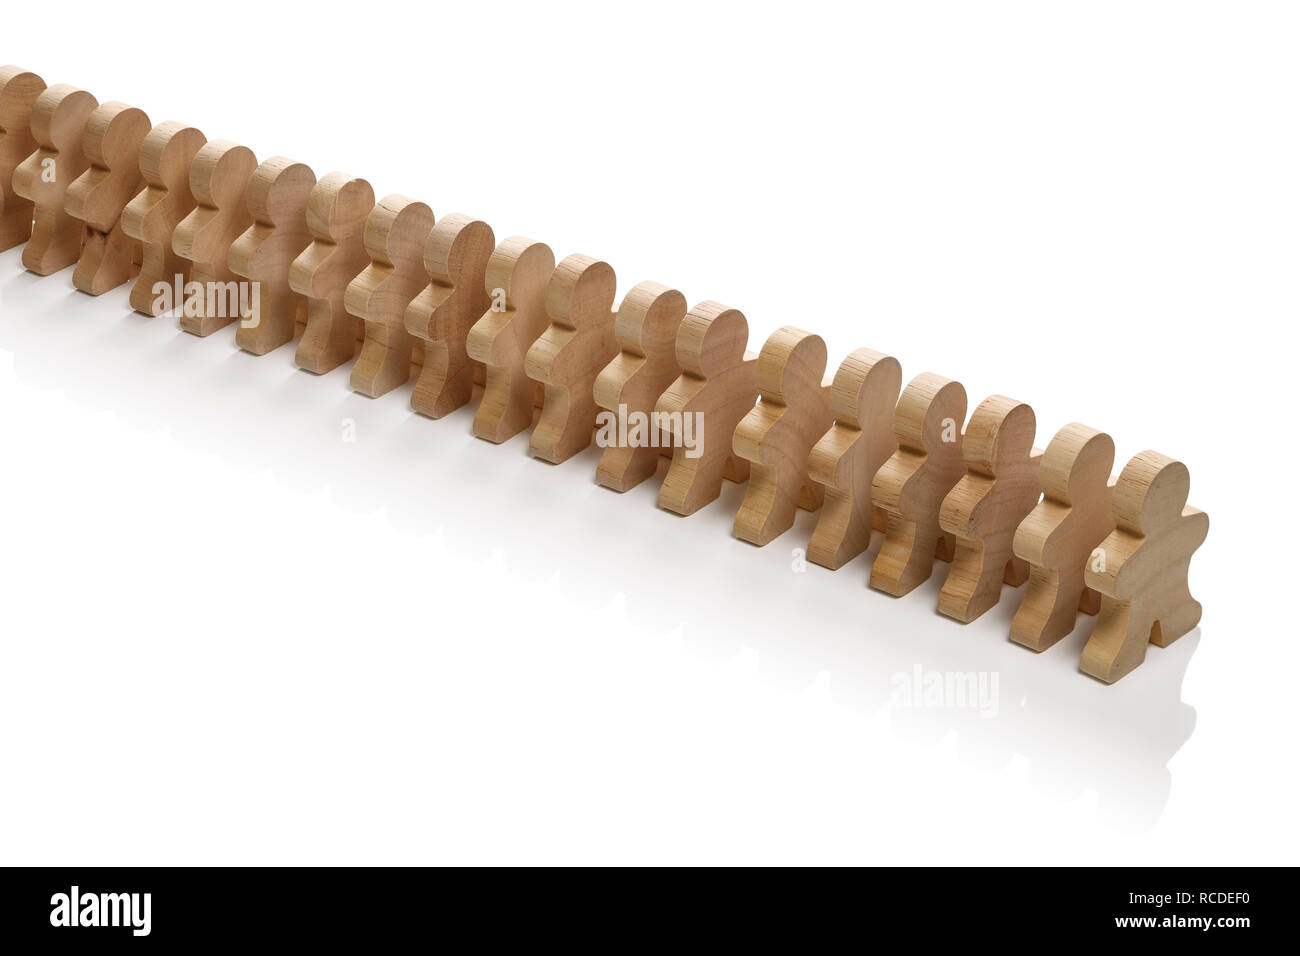 A straight line of small wooden people Stock Photo